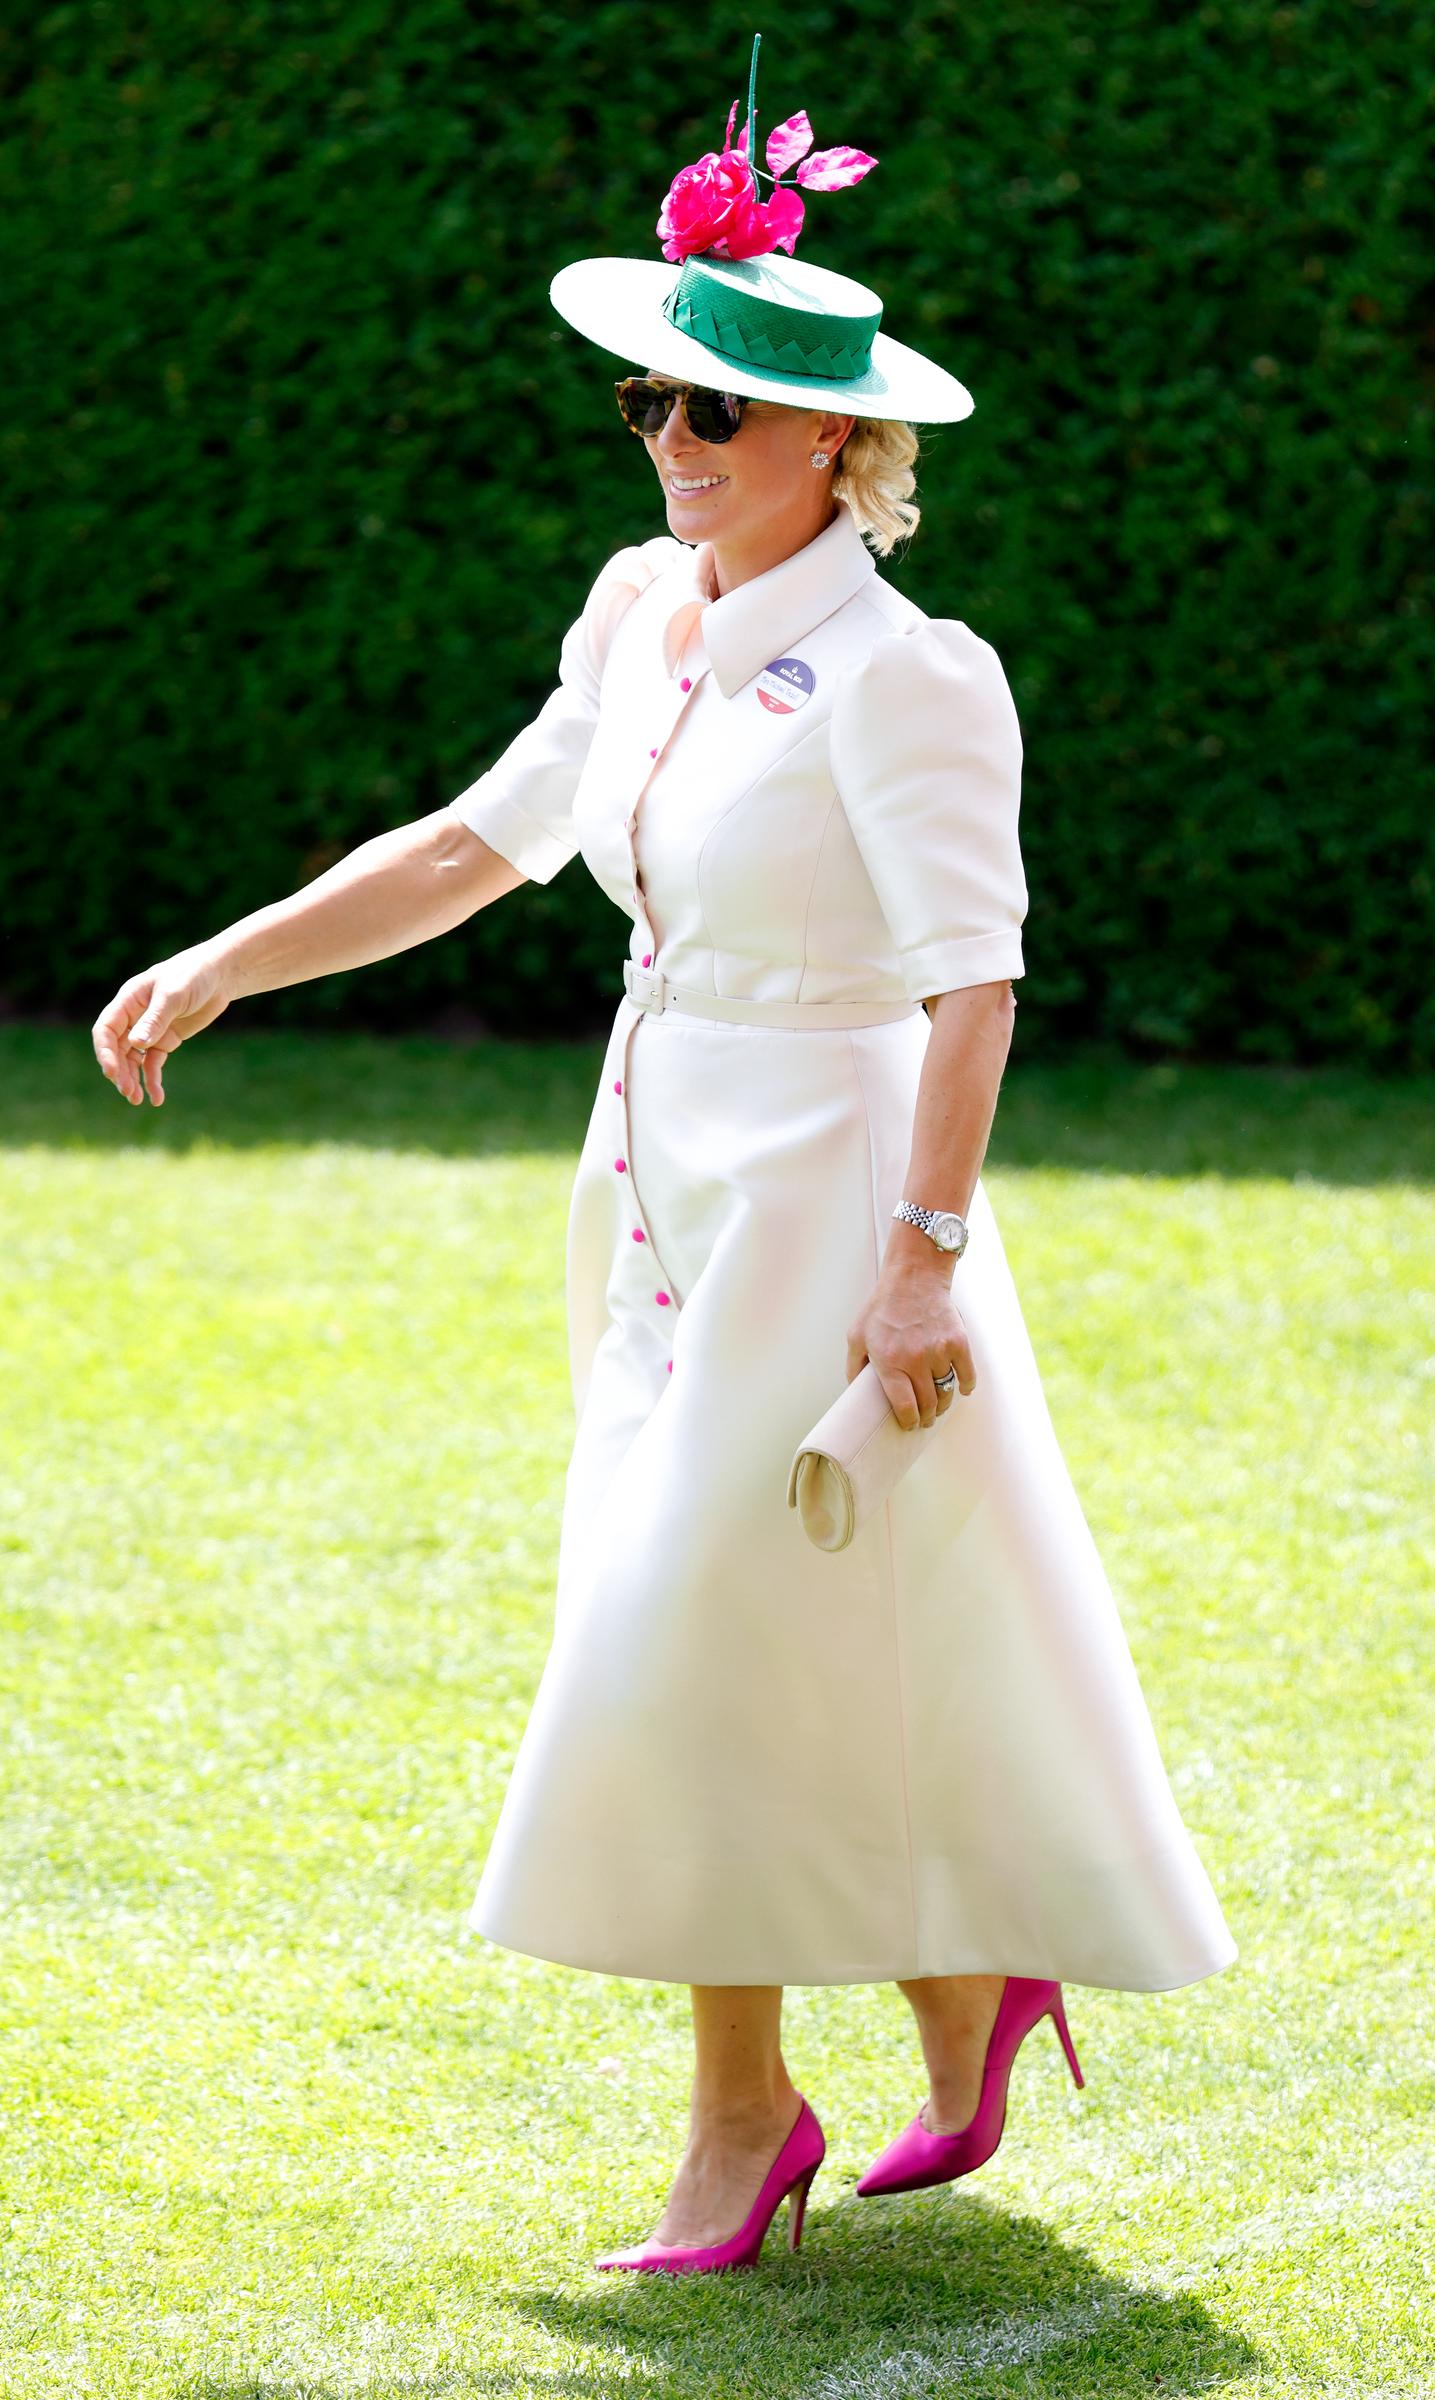 Zara Tindall at the third day of the Royal Ascot at Ascot Racecourse on June 16, 2022, in Ascot, England | Source: Getty Images